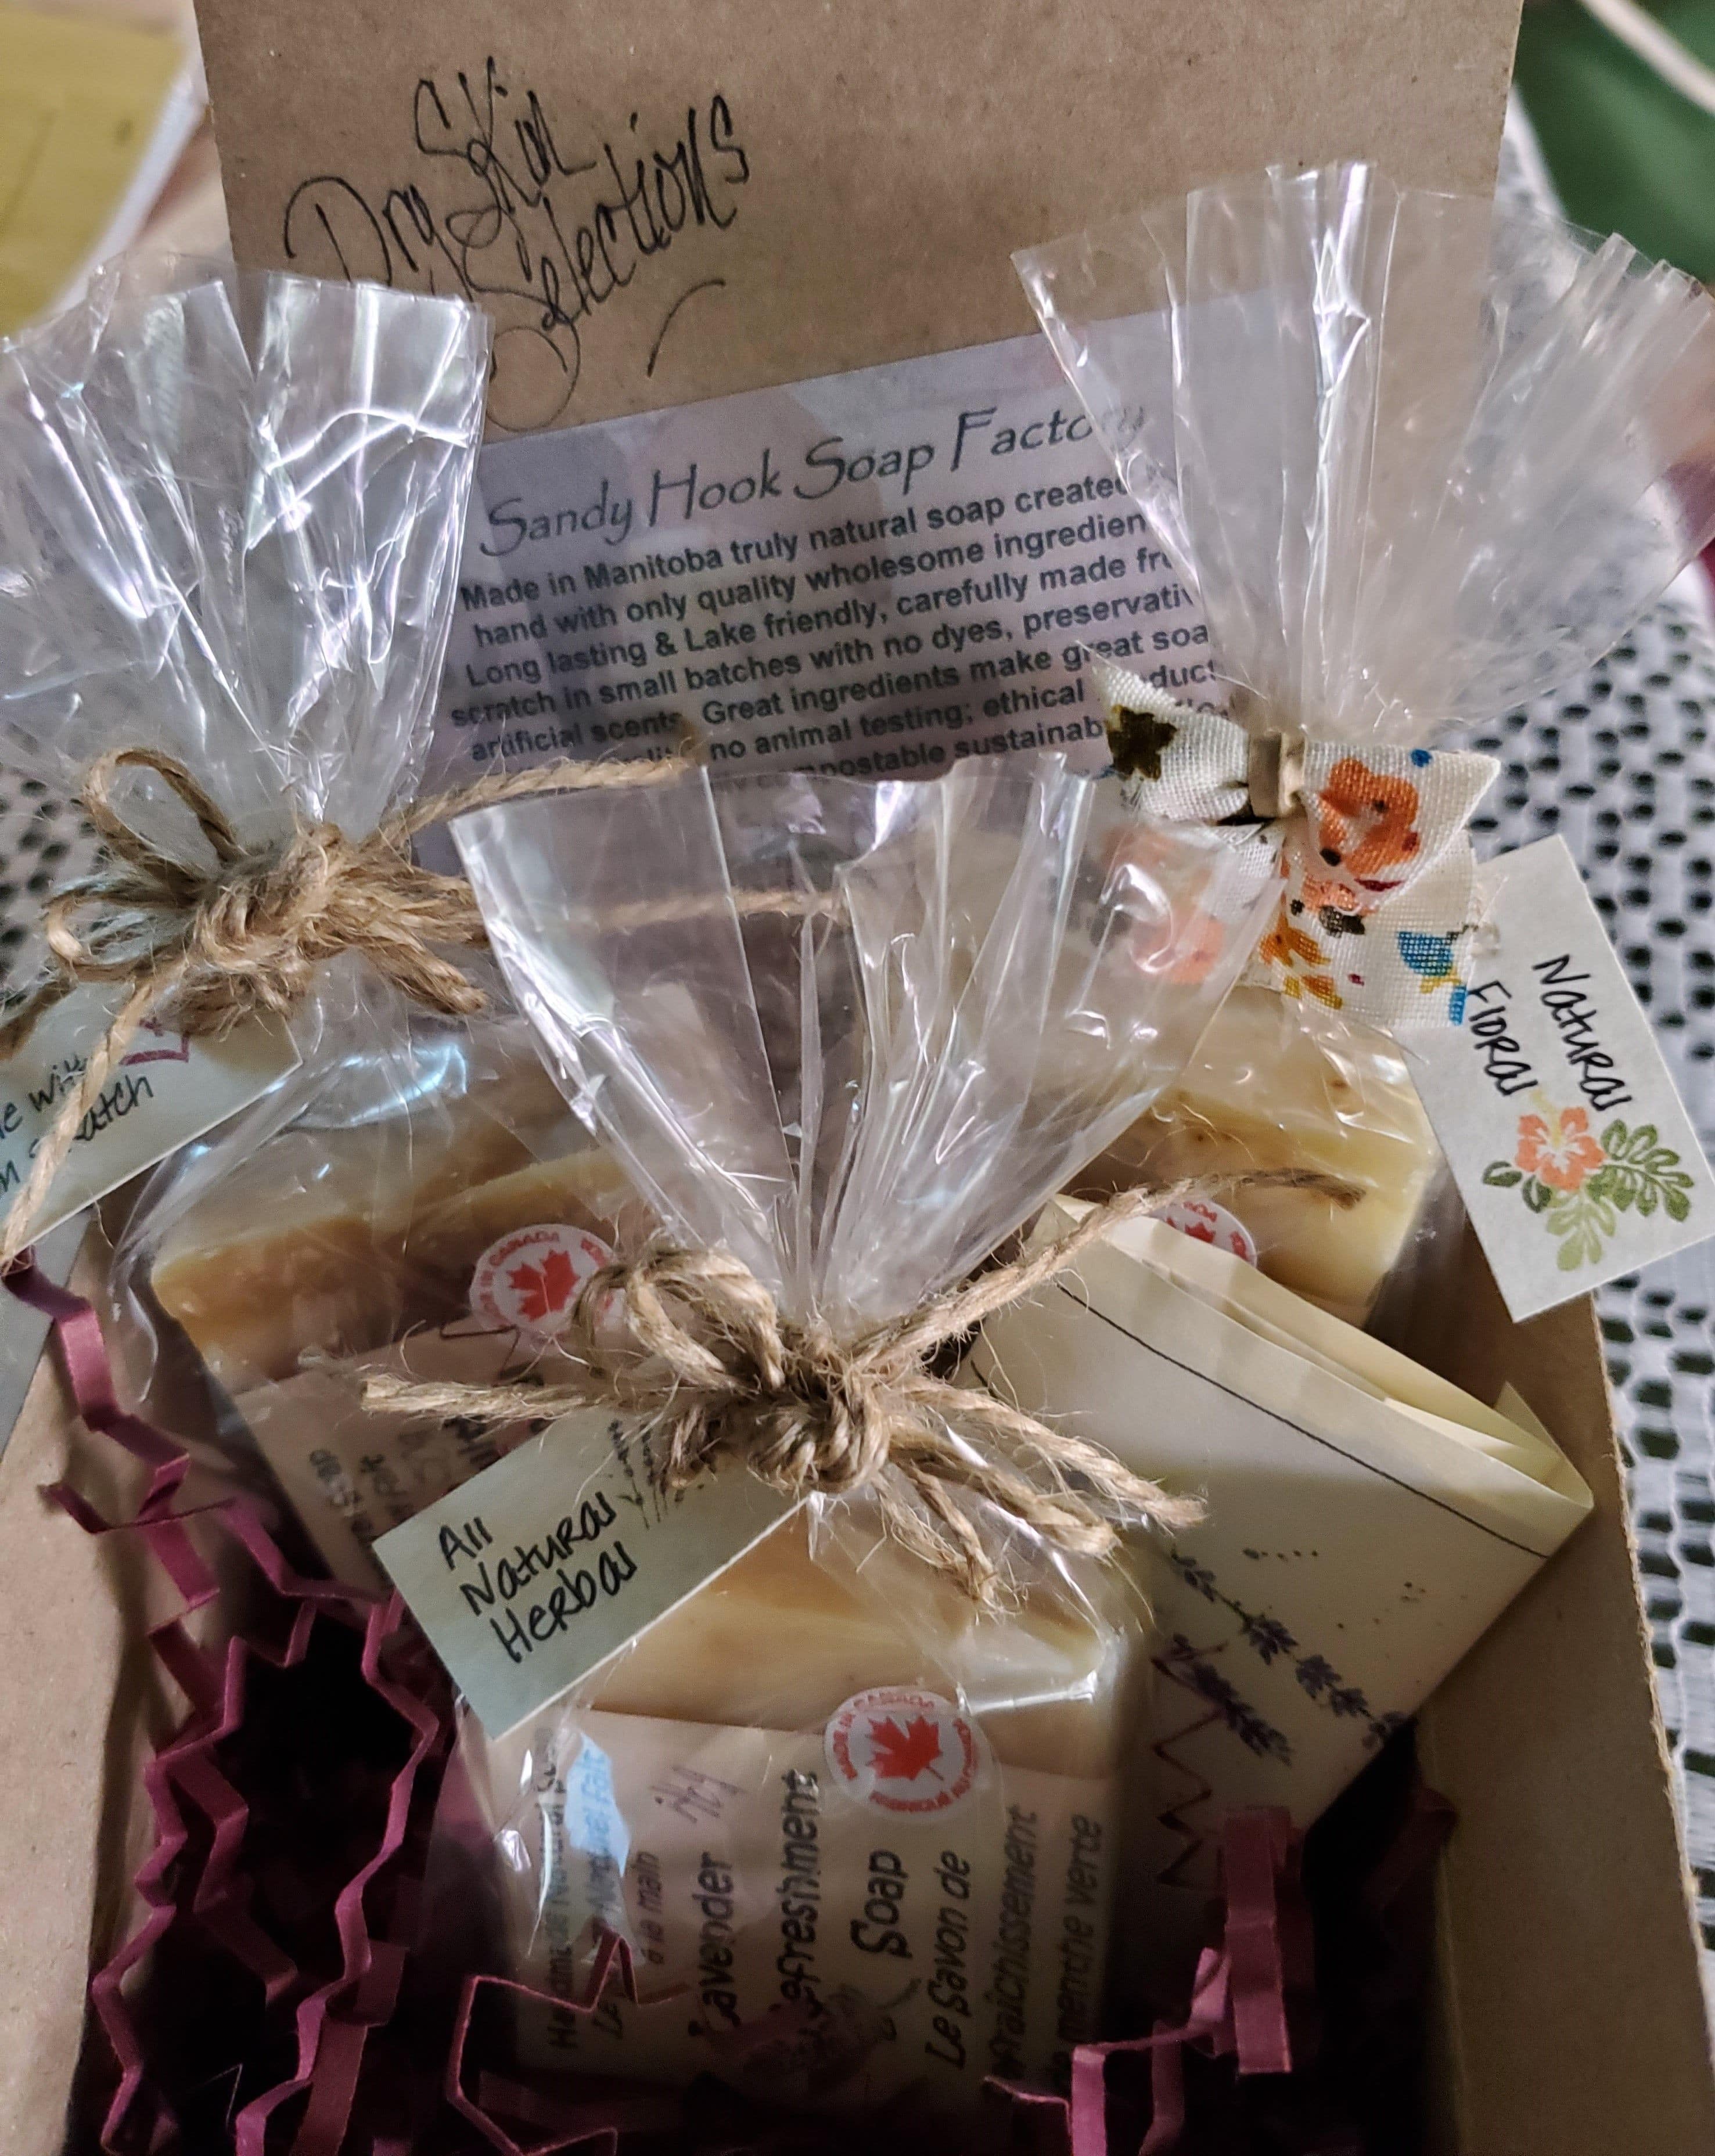 We offer many types of all natural soap gift box sets for under $10.  Wonderful little host or hostess gift, for care workers, nurses, teachers, almost anyone.